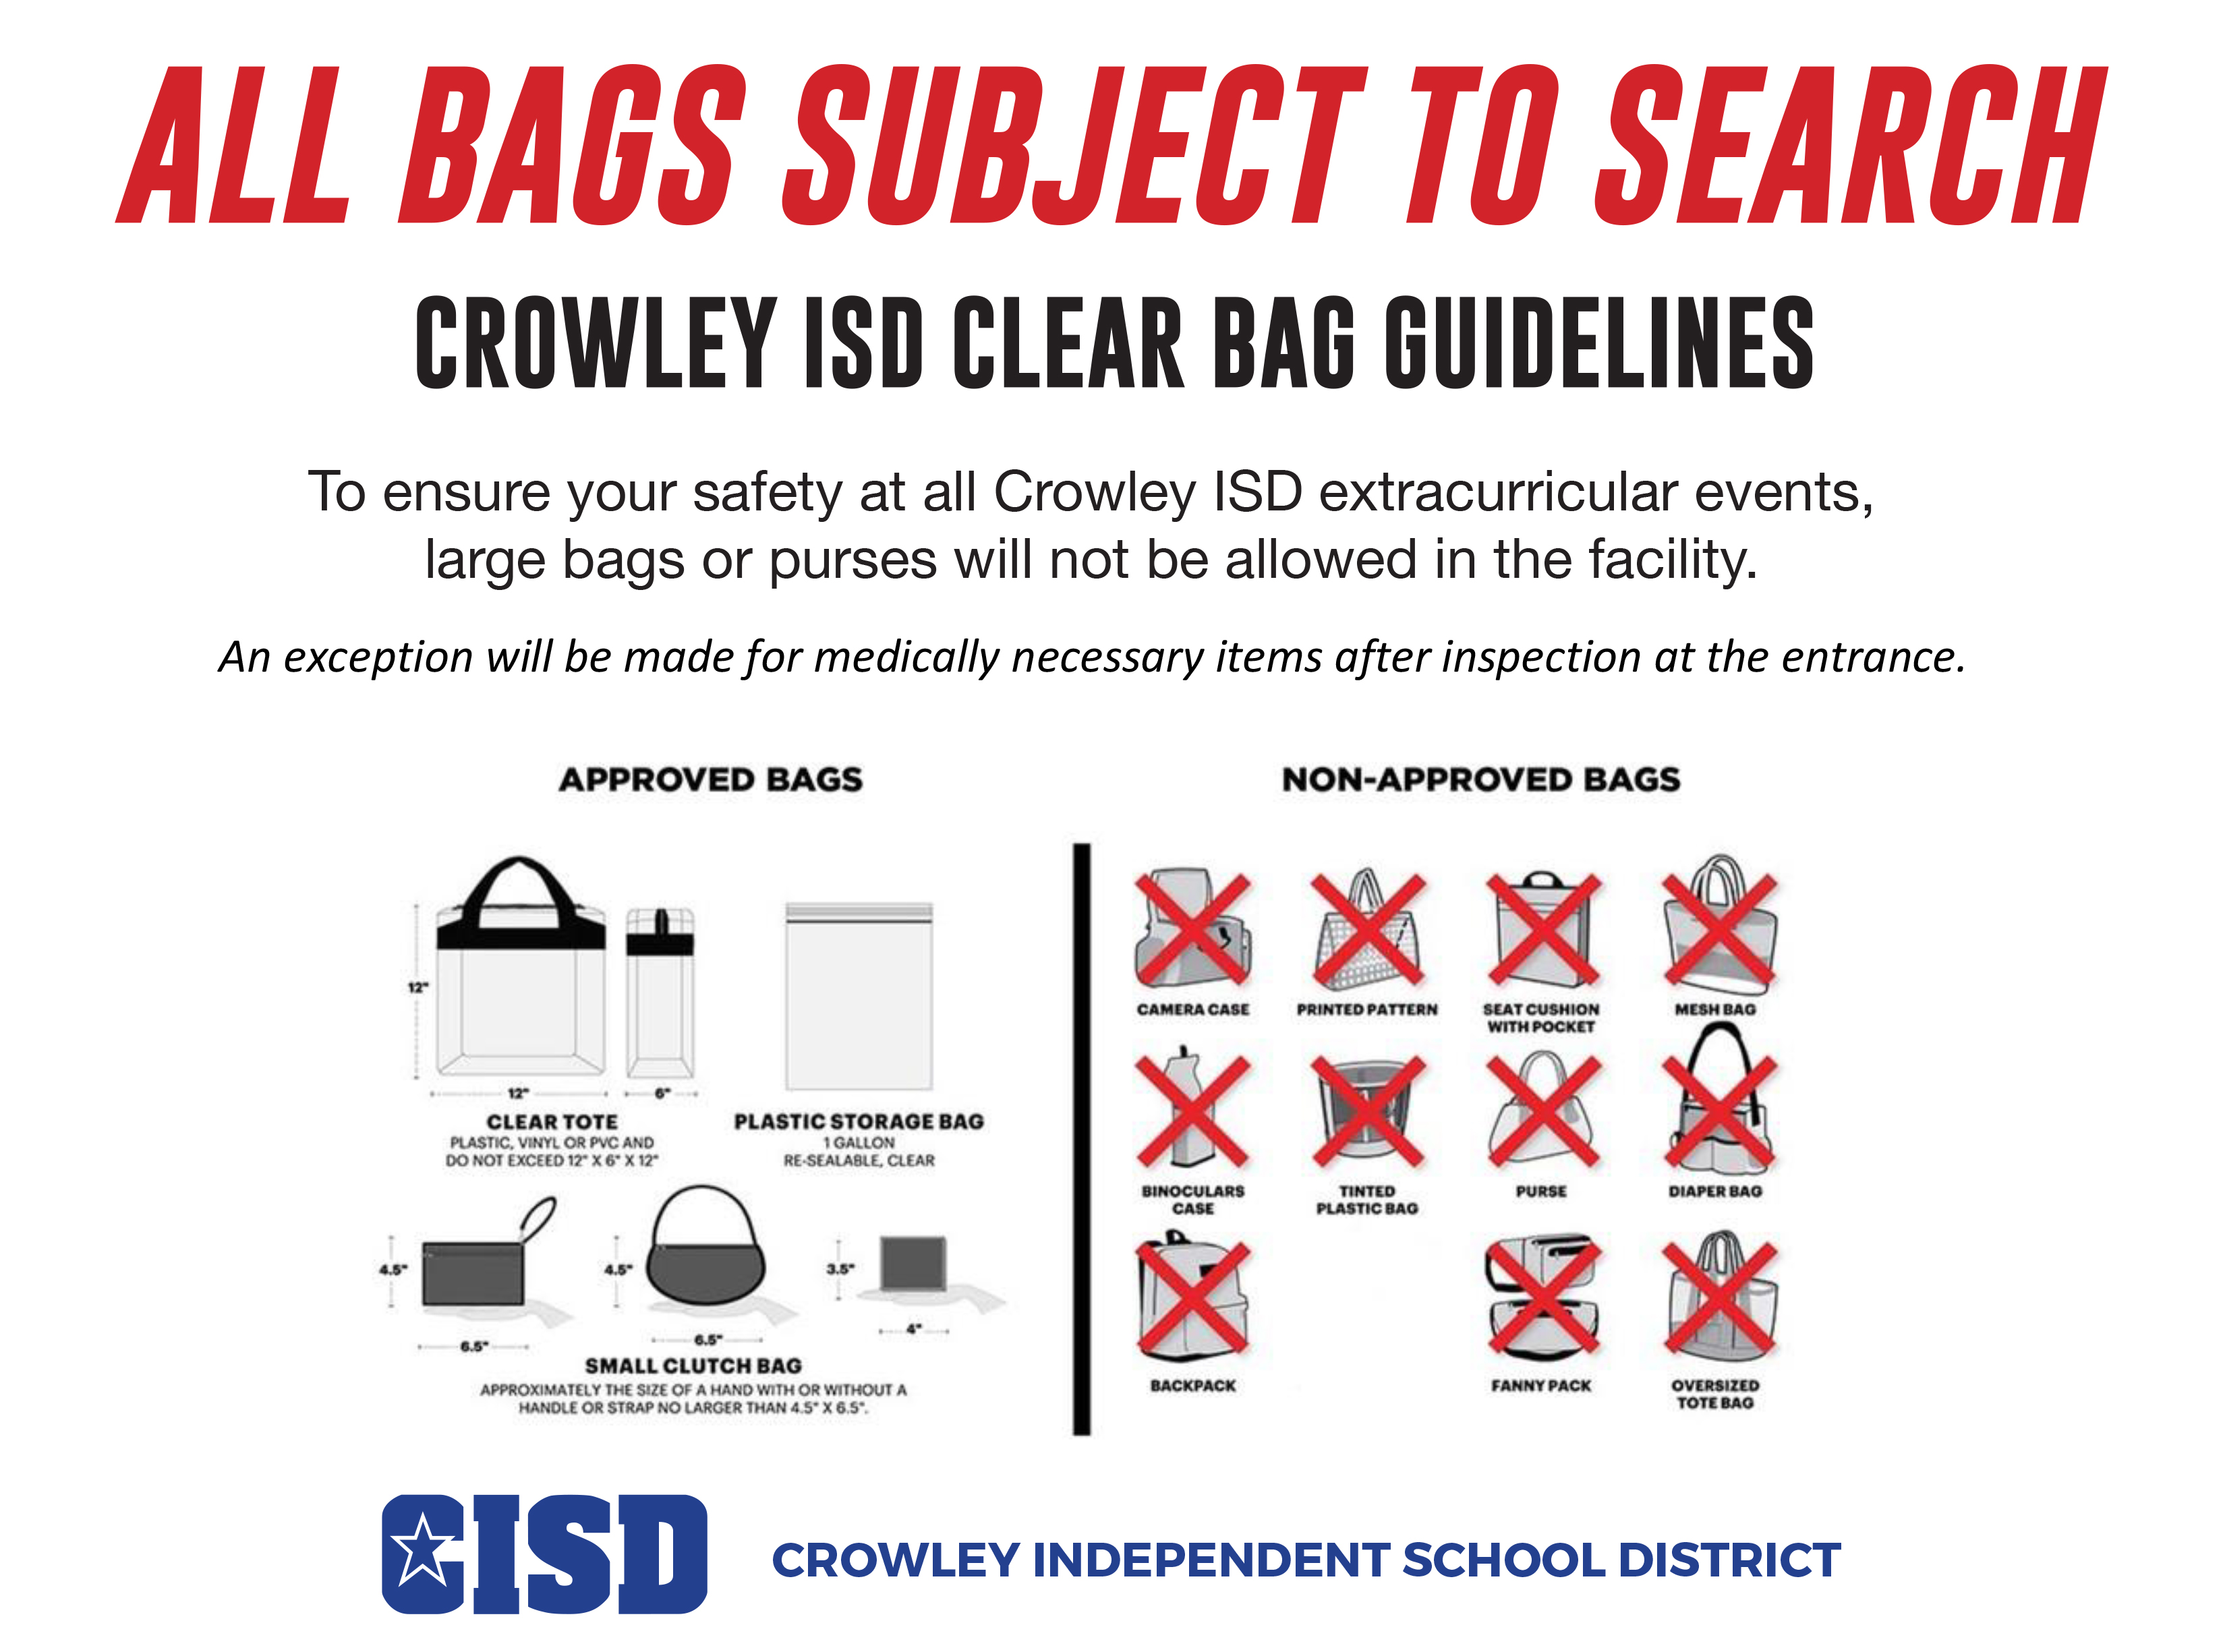 Crowley ISD Clear Bag Guidelines - All Bags Subject To Search